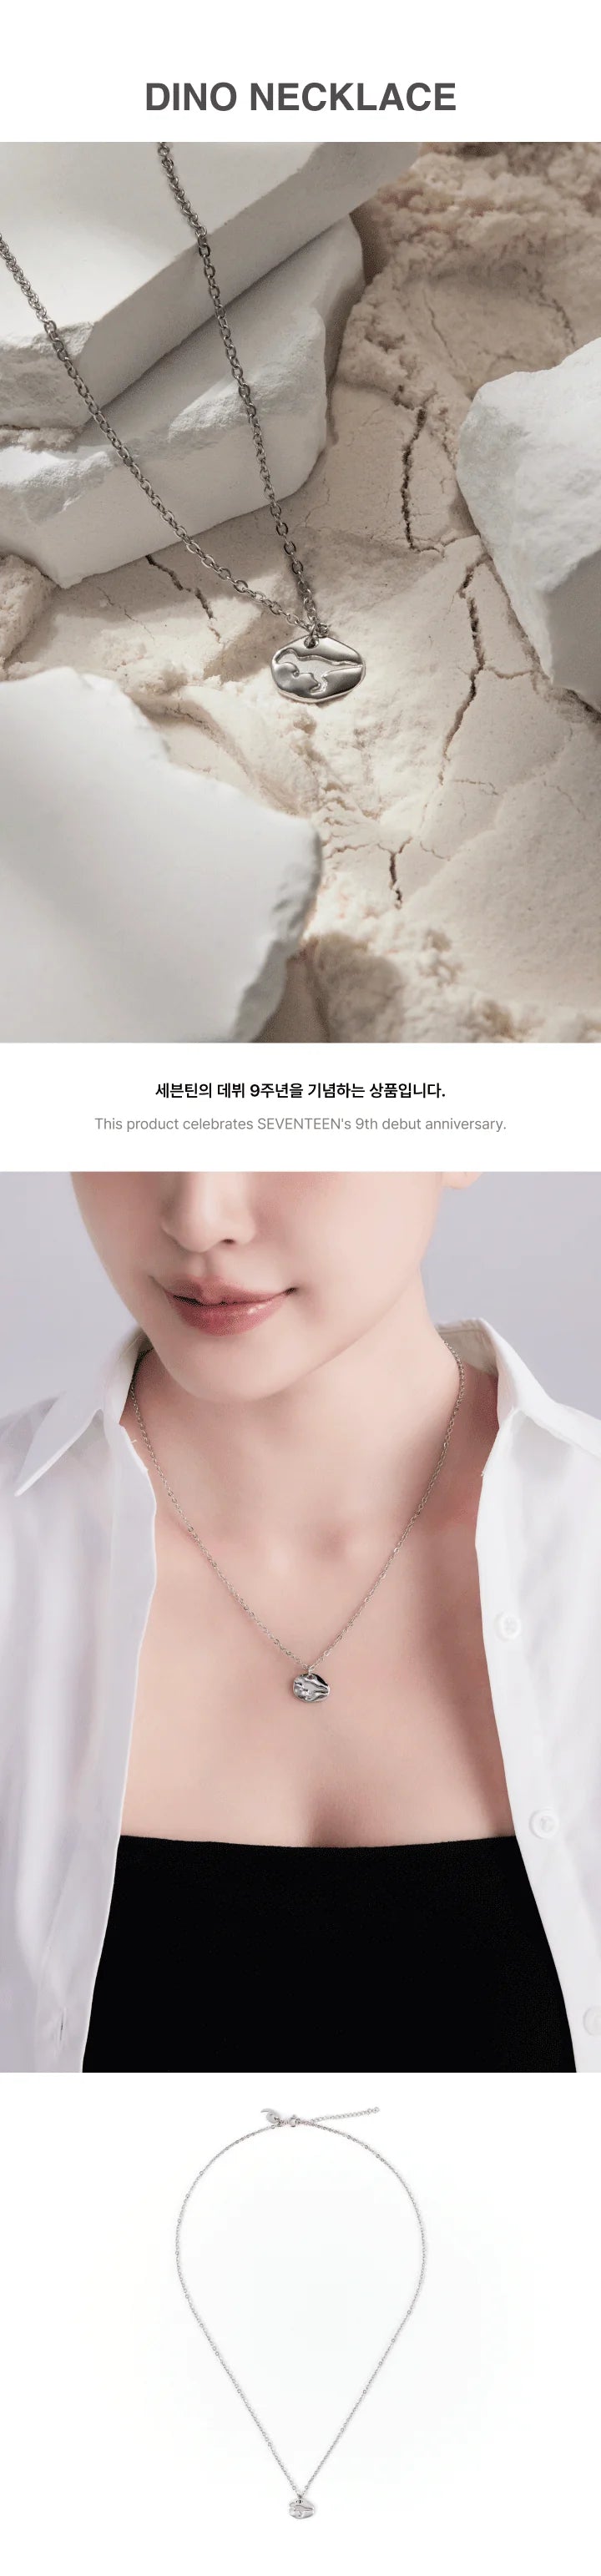 [PRE ORDER] SEVENTEEN - 9TH ANNIVERSARY (Official MD) / NECKLACE: DINO 